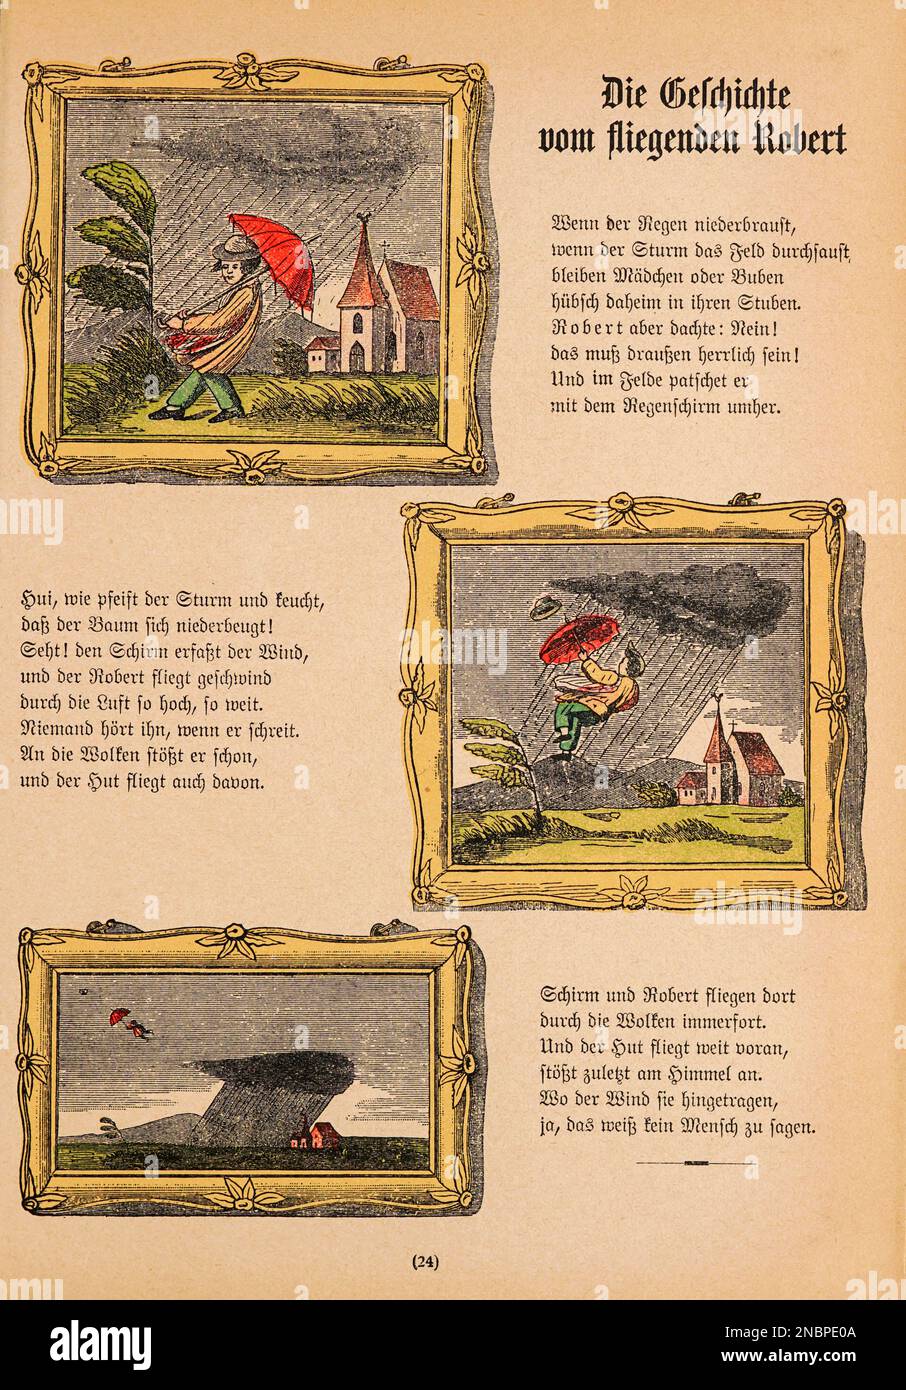 from the original German Version of the book ' Das Struwwelpeter-album : aus Bilderbüchern ' by Hoffmann, Heinrich, 1809-1894 Publication date 1900 Publisher Frankfurt am Main : Rütten & Loening [ Der Struwwelpeter ('shock-headed Peter' or 'Shaggy Peter') is an 1845 German children's book by Heinrich Hoffmann. It comprises ten illustrated and rhymed stories, mostly about children. Each has a clear moral that demonstrates the disastrous consequences of misbehavior in an exaggerated way.[1] The title of the first story provides the title of the whole book. Der Struwwelpeter is one of the earlies Stock Photo